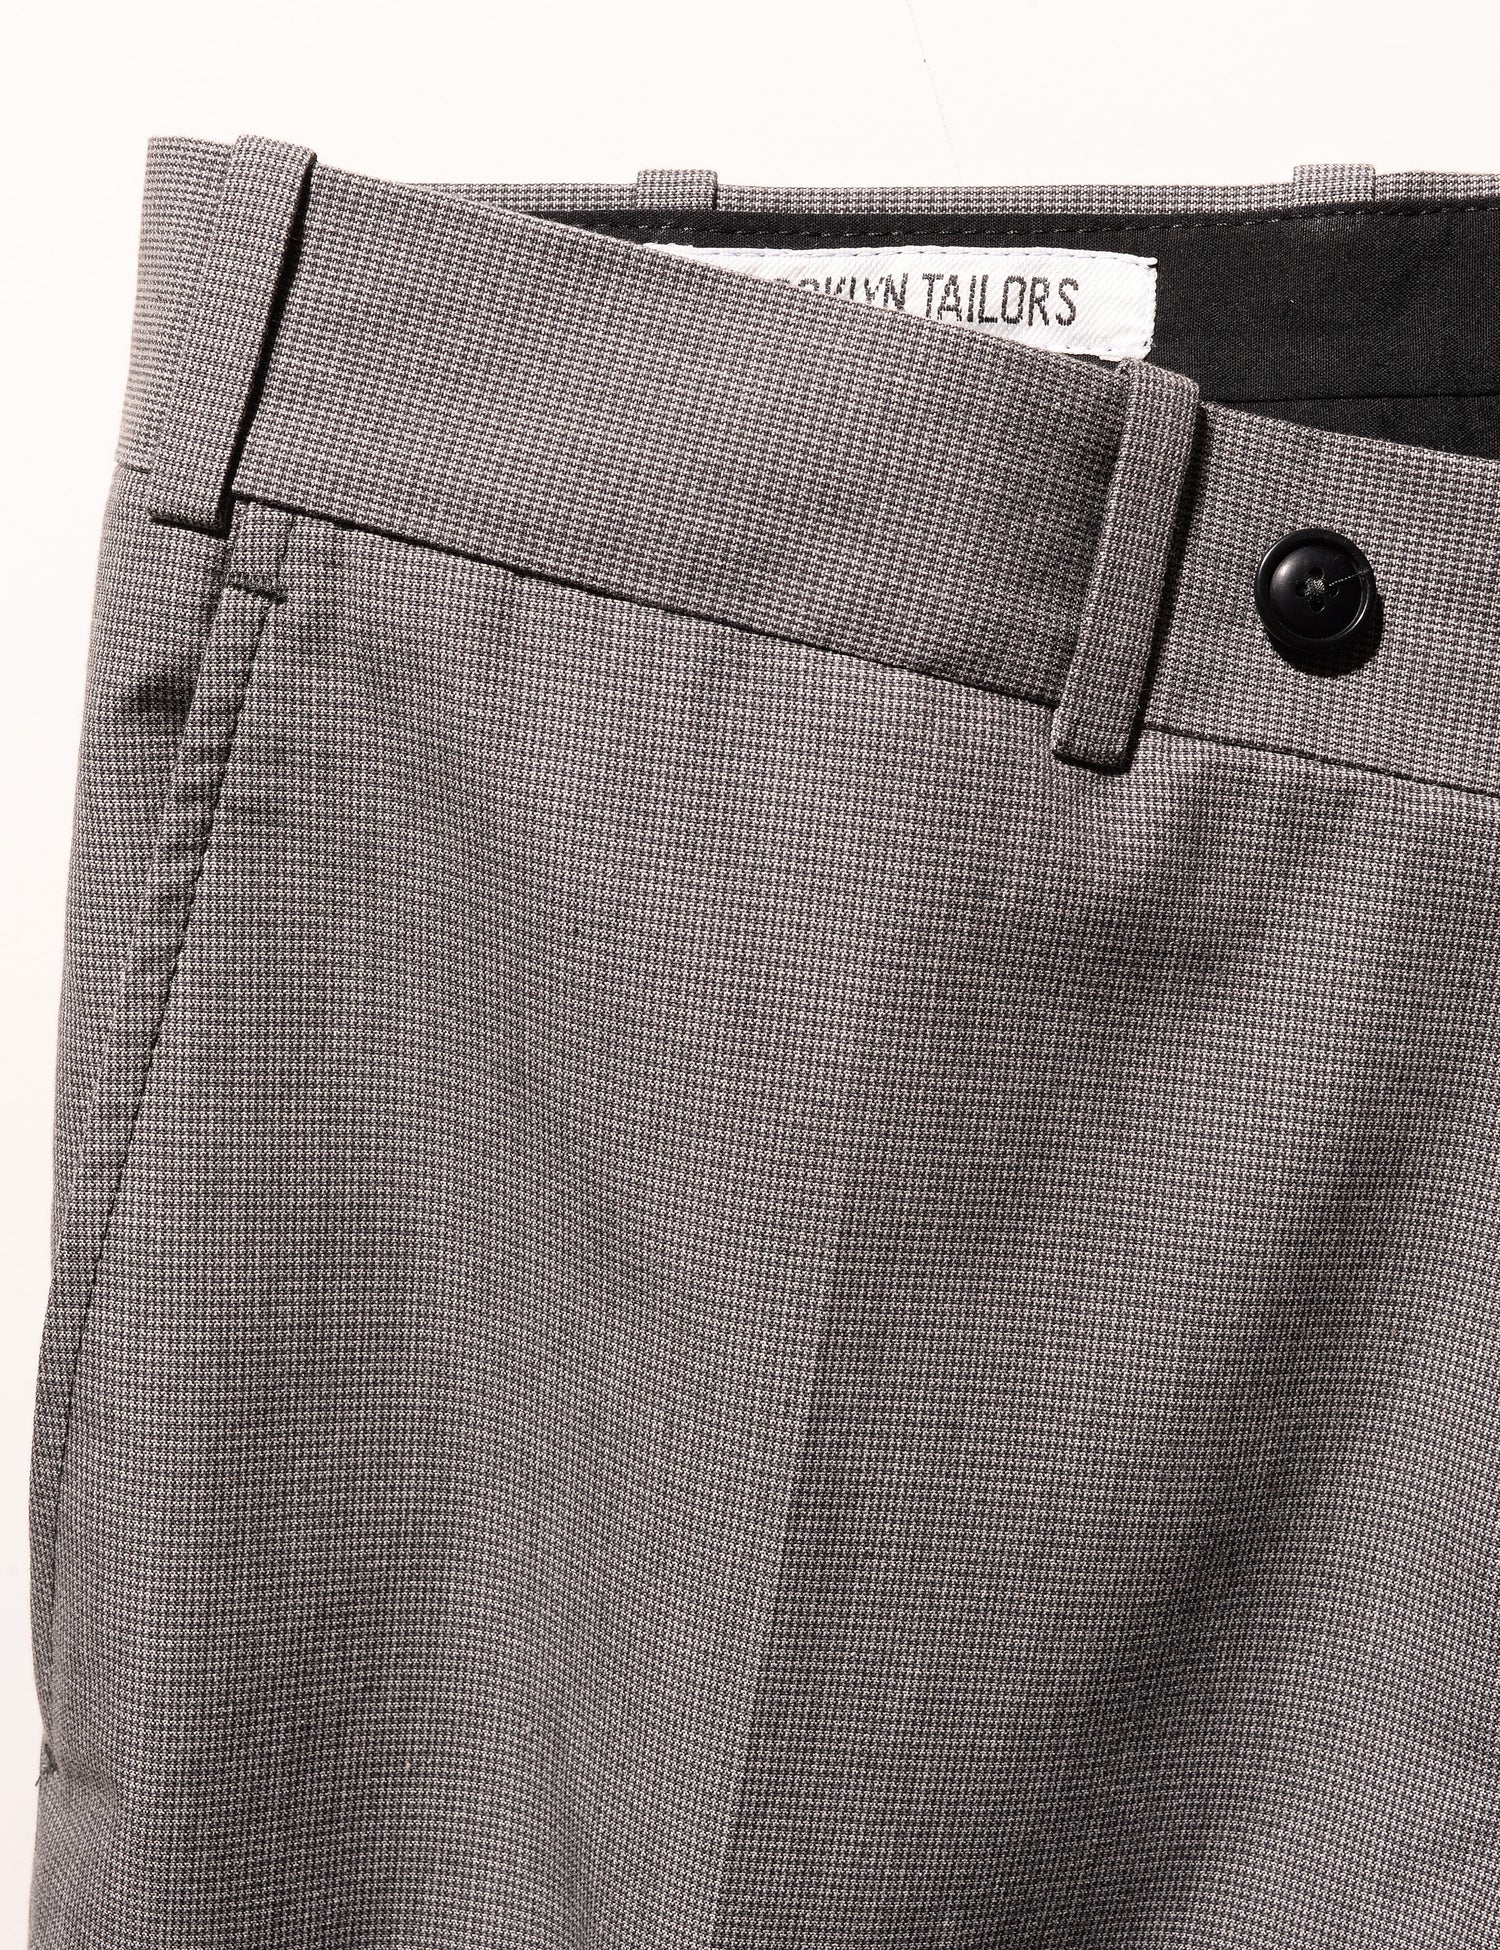 Detail of BKT50 Tailored Trousers in Cotton Micro Weave - Graphite showing waistband and fabric pattern